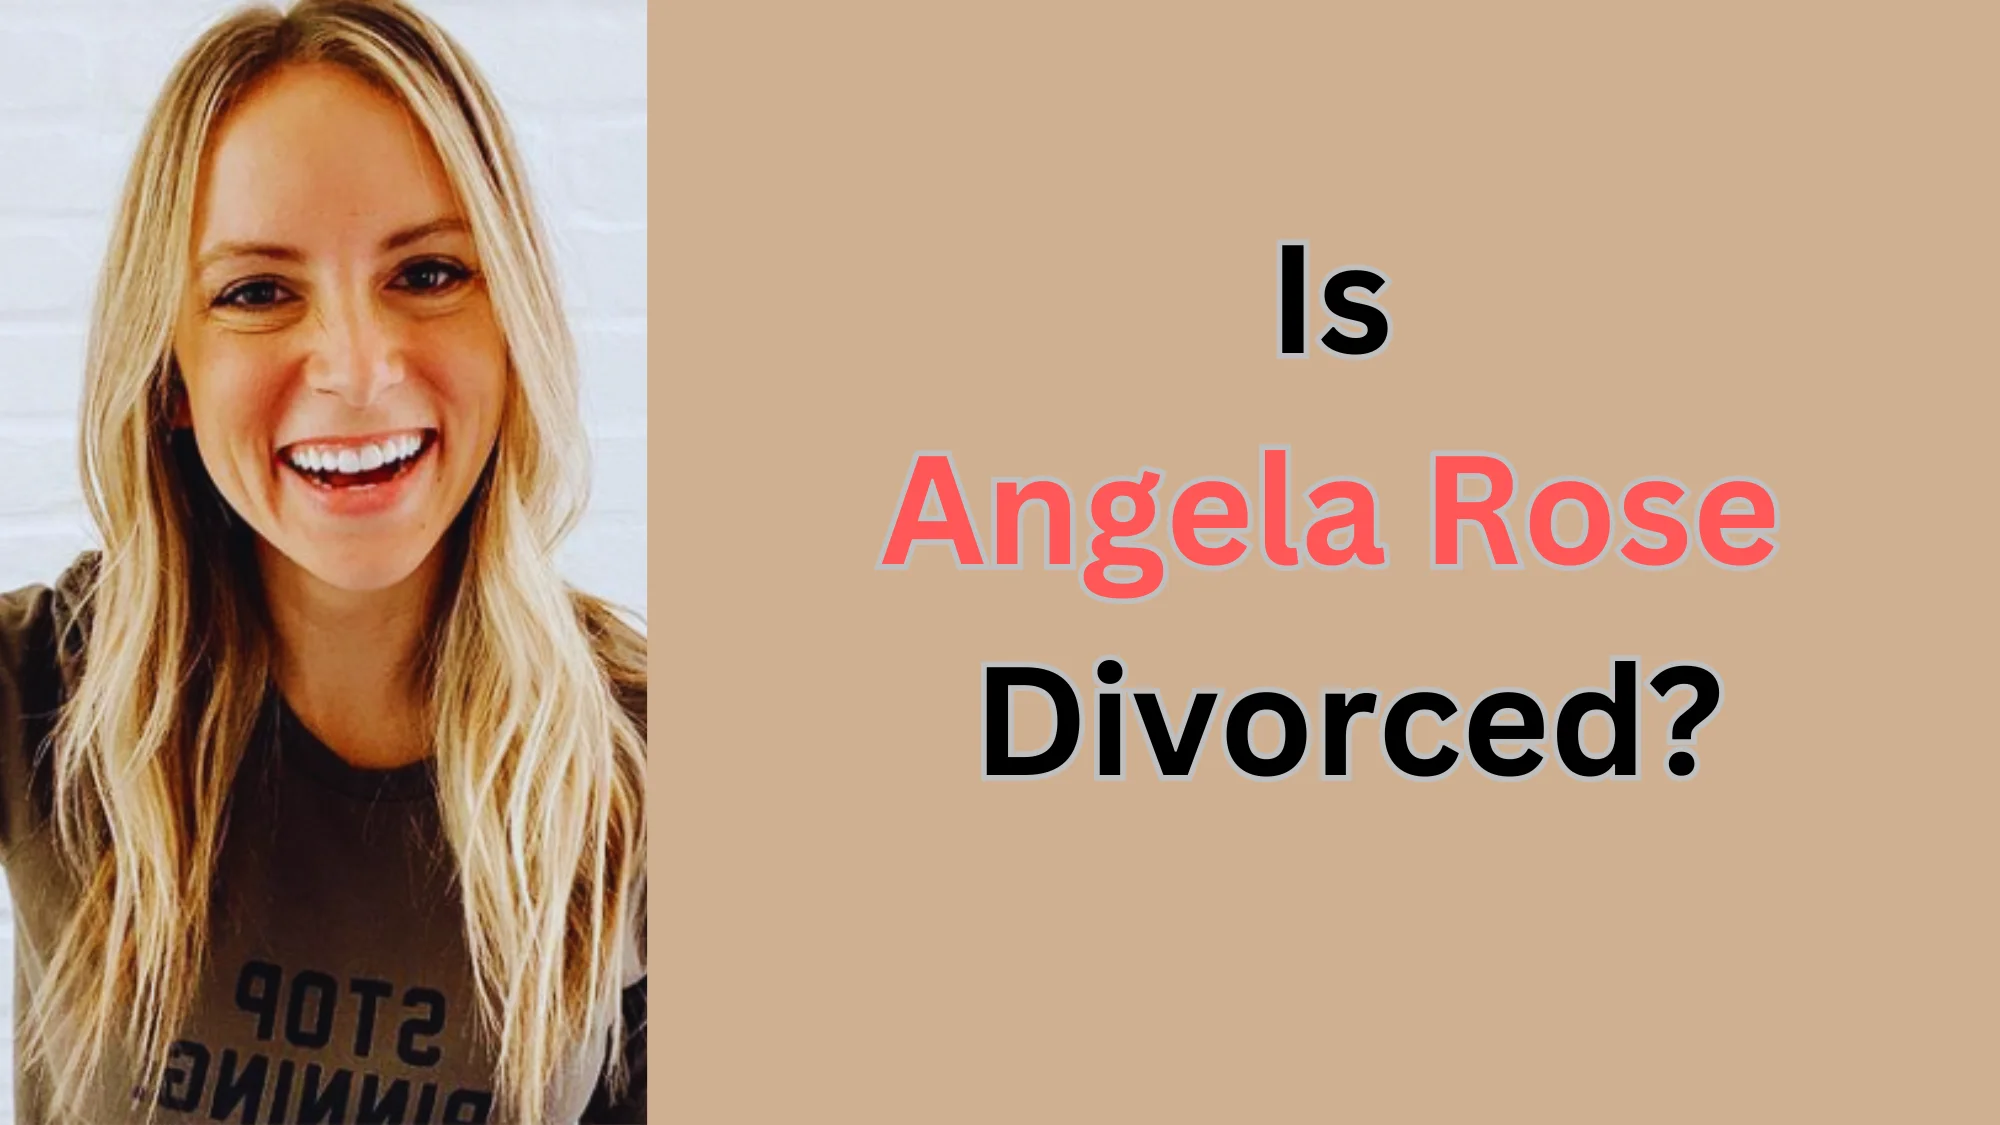 Is Angela Rose Divorced (Find Out Here)